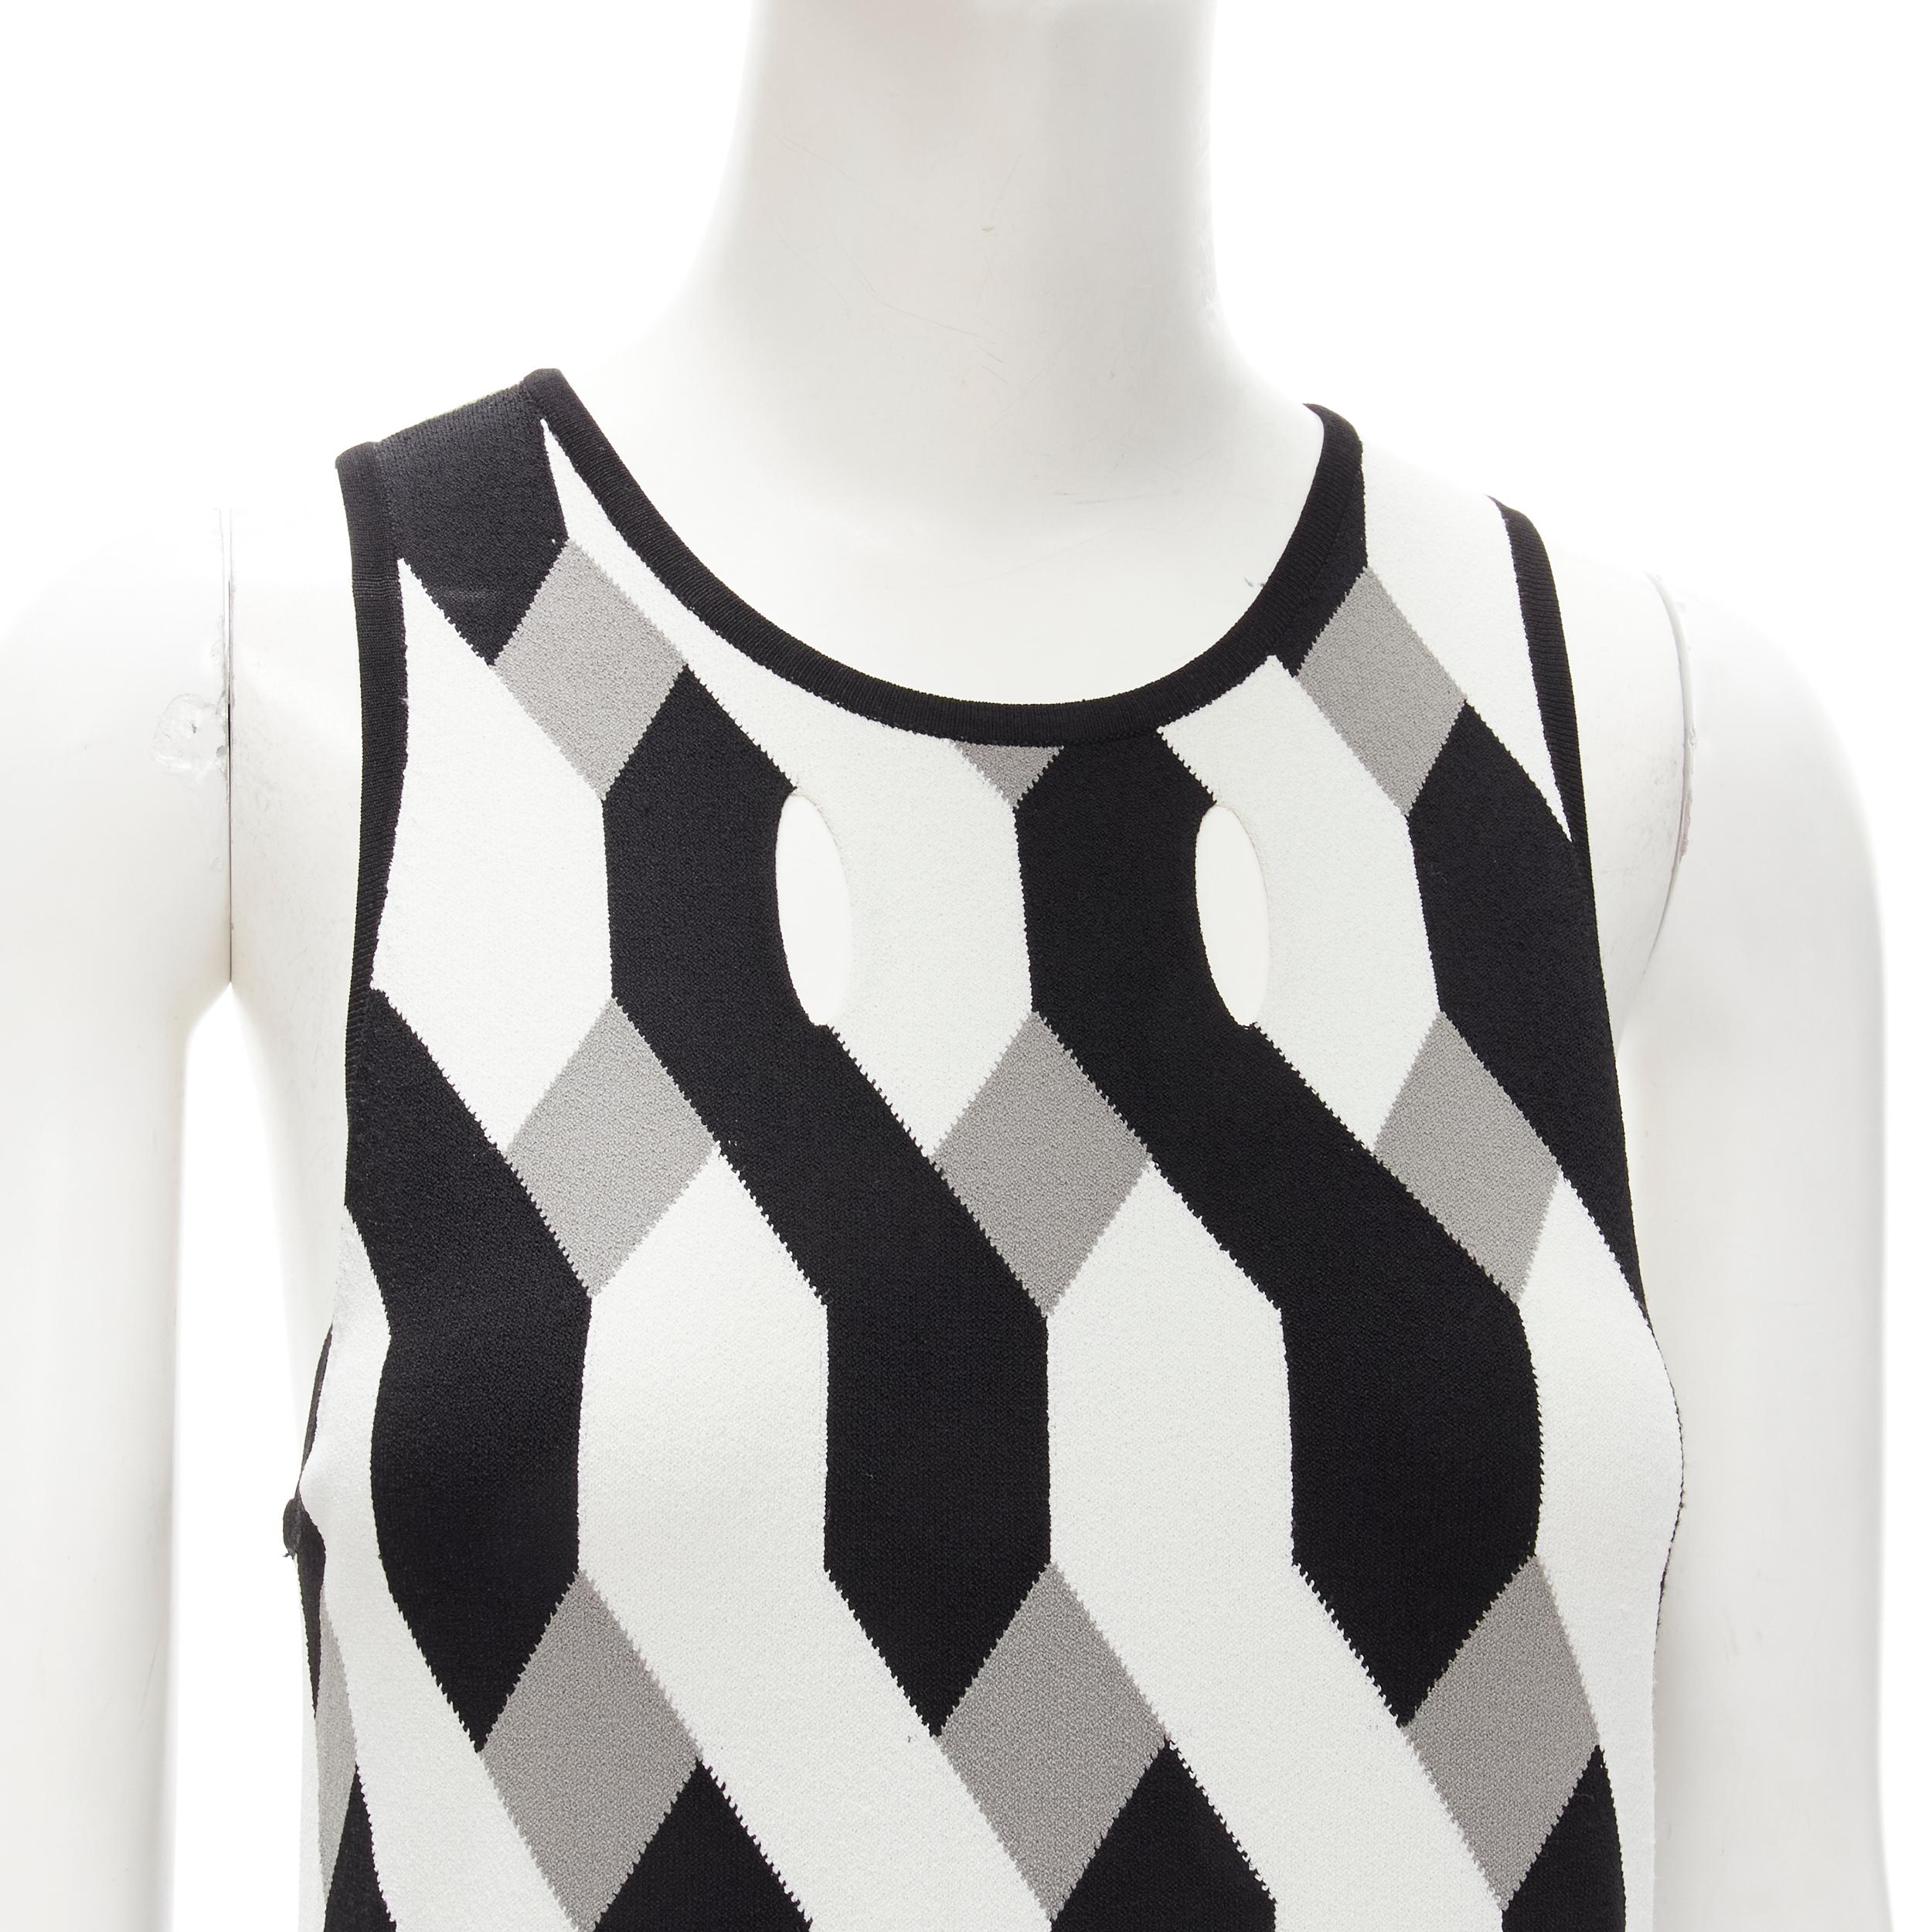 RAG & BONE black grey geometric woven cut out knitted dress S
Brand: rag & bone
Color: Grey
Pattern: Geometric
Extra Detail: Cut out throughout. Side slit at hem.
Made in: China

CONDITION:
Condition: Excellent, this item was pre-owned and is in